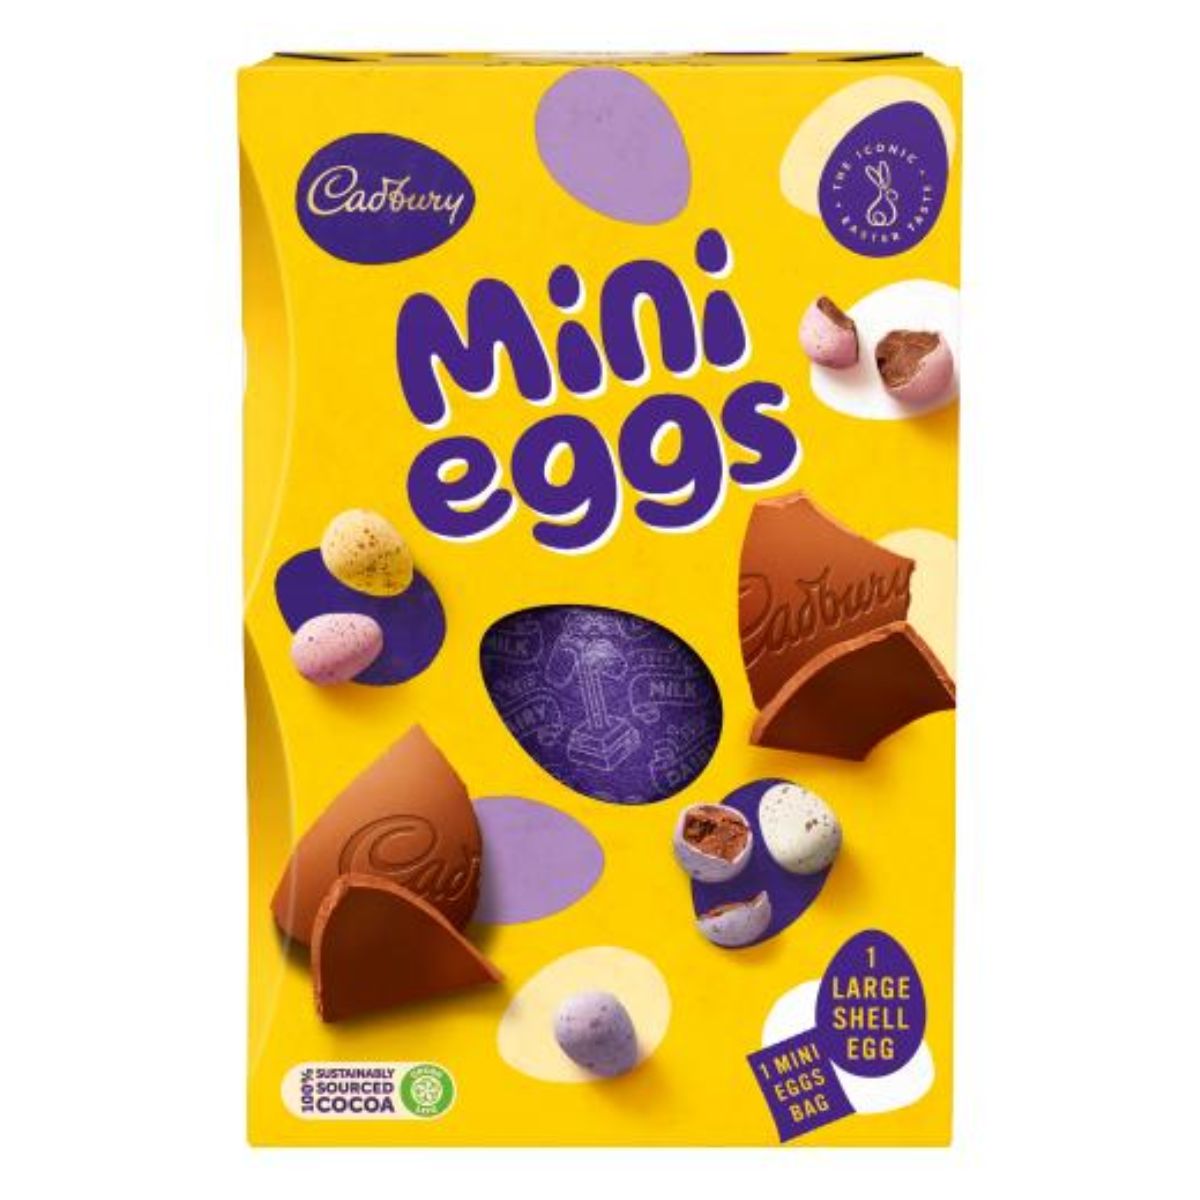 Cadbury - Mini Easter Eggs - 193g in a box on a white background.